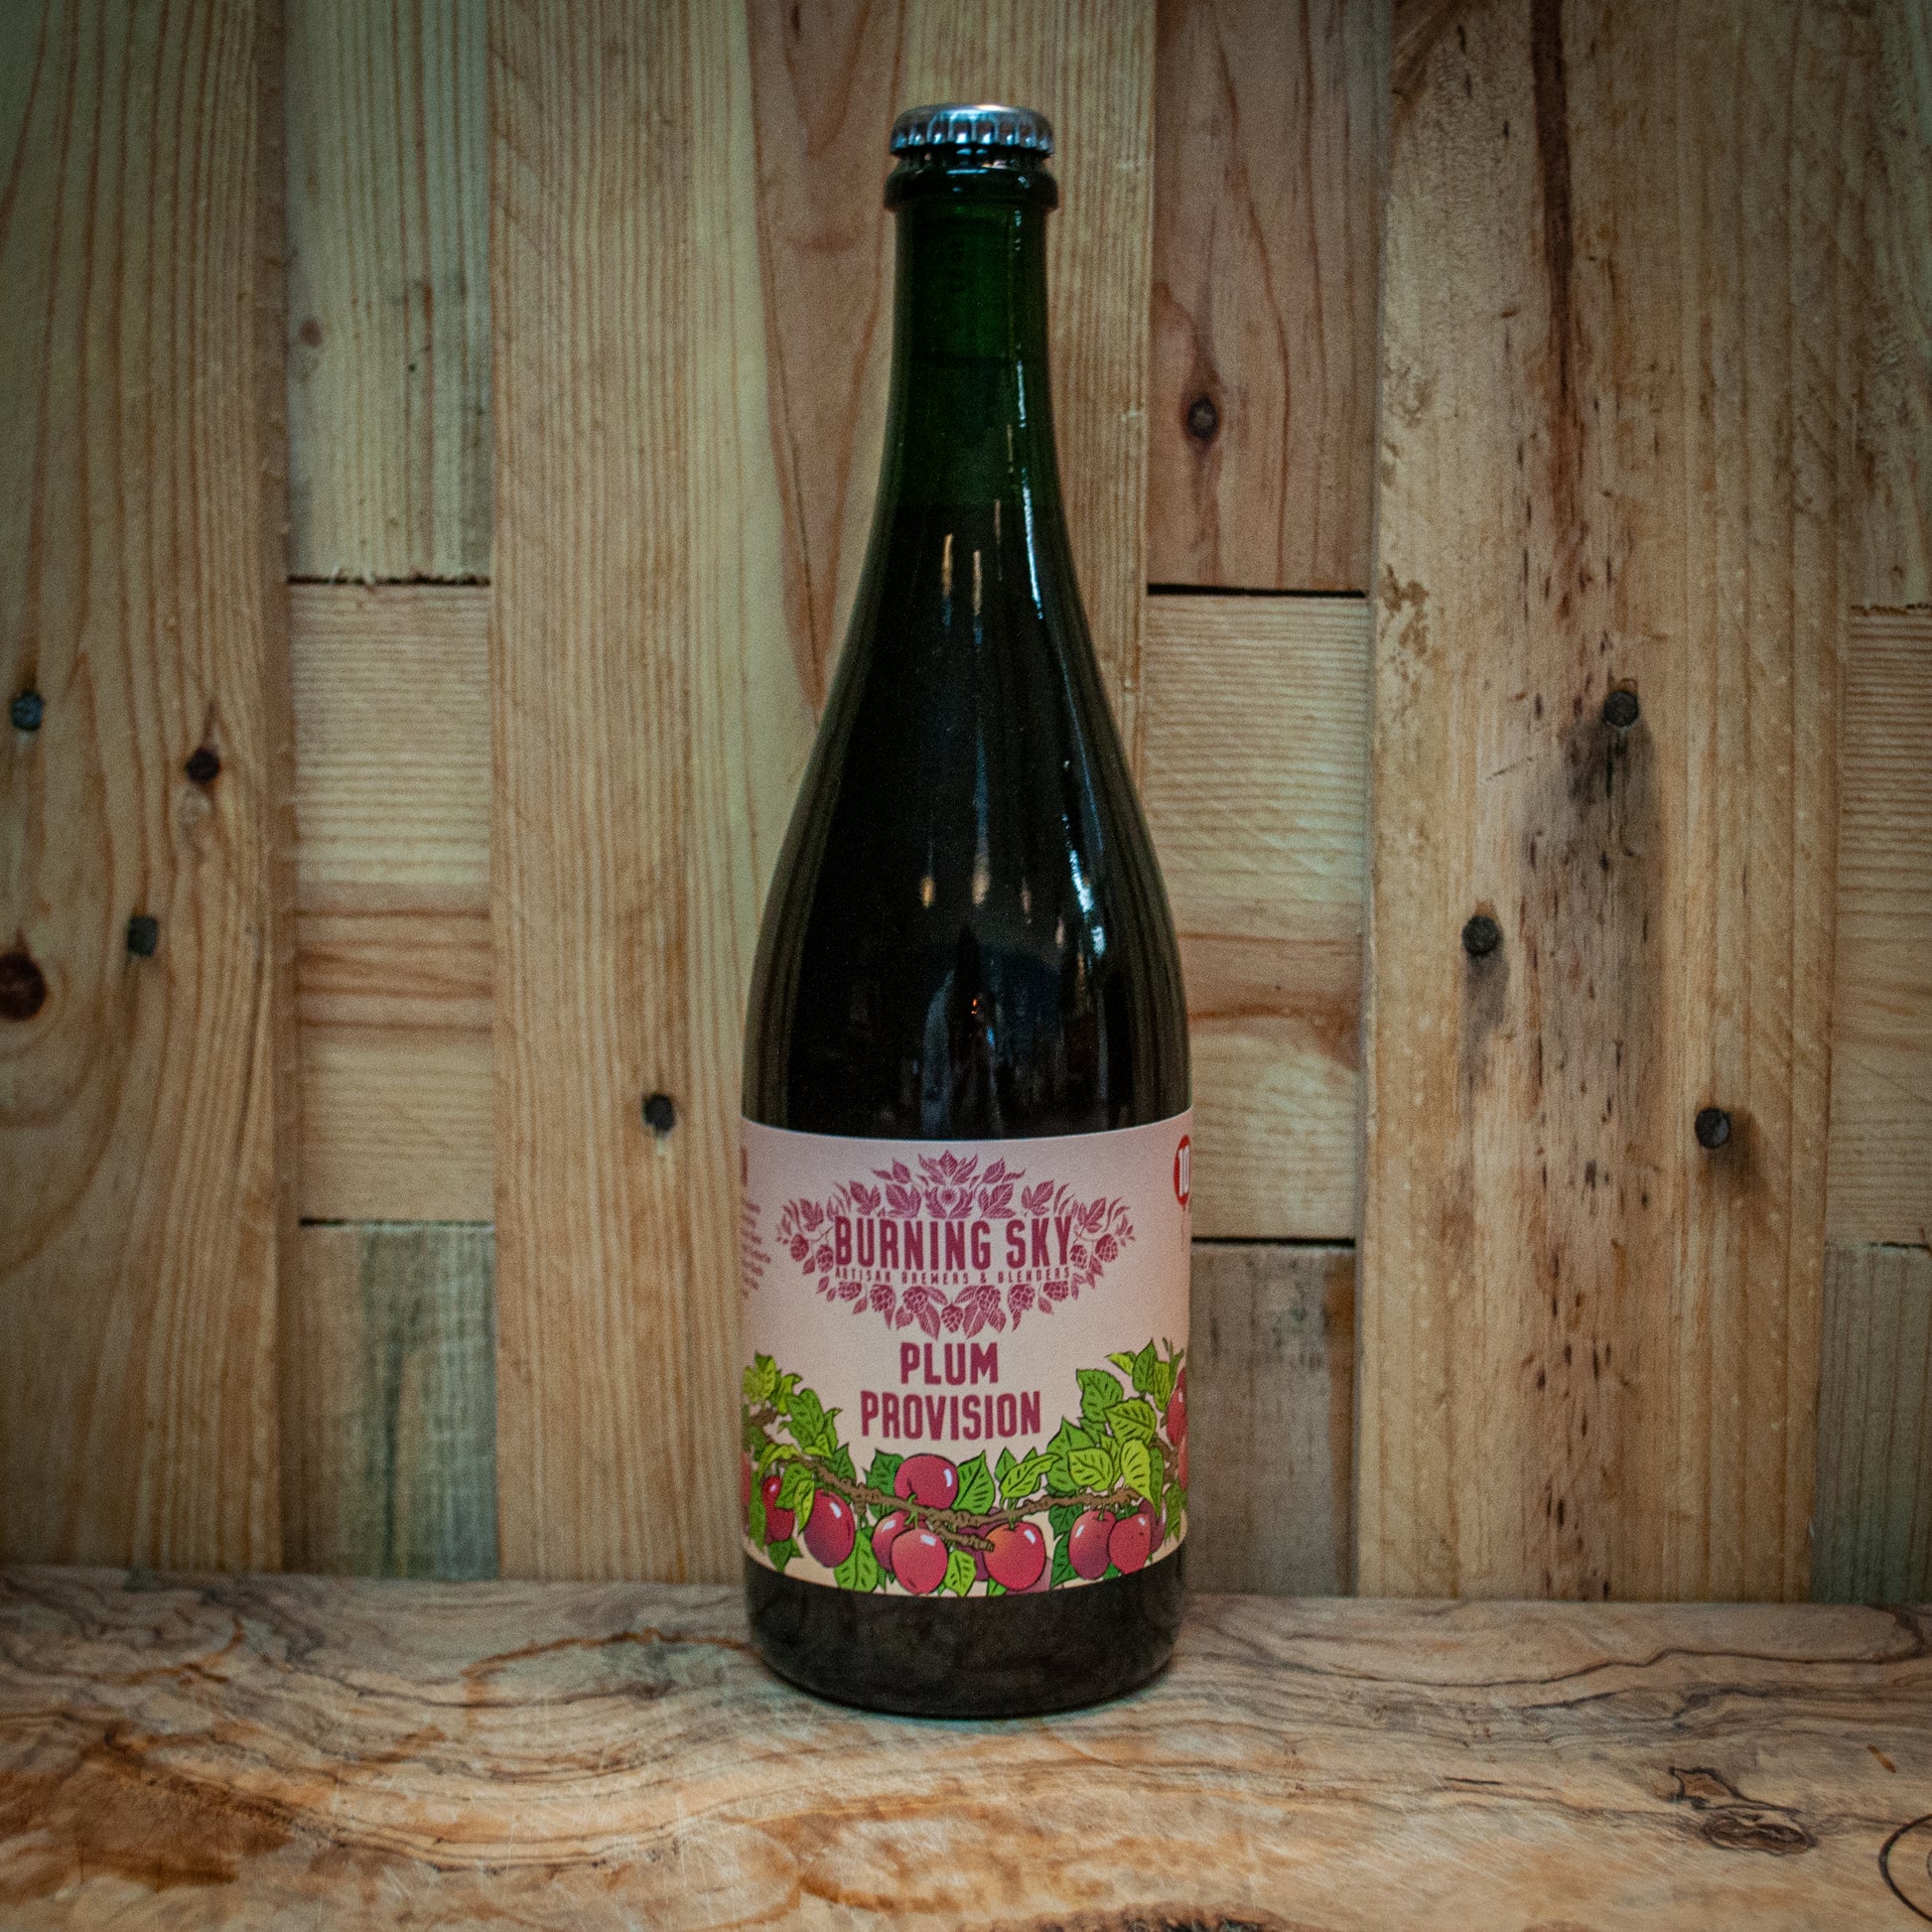 Plum Provision Mixed Fermentation Saison available at Essex Spirits Co. online shop and The Essex Distillery, Chelmsford